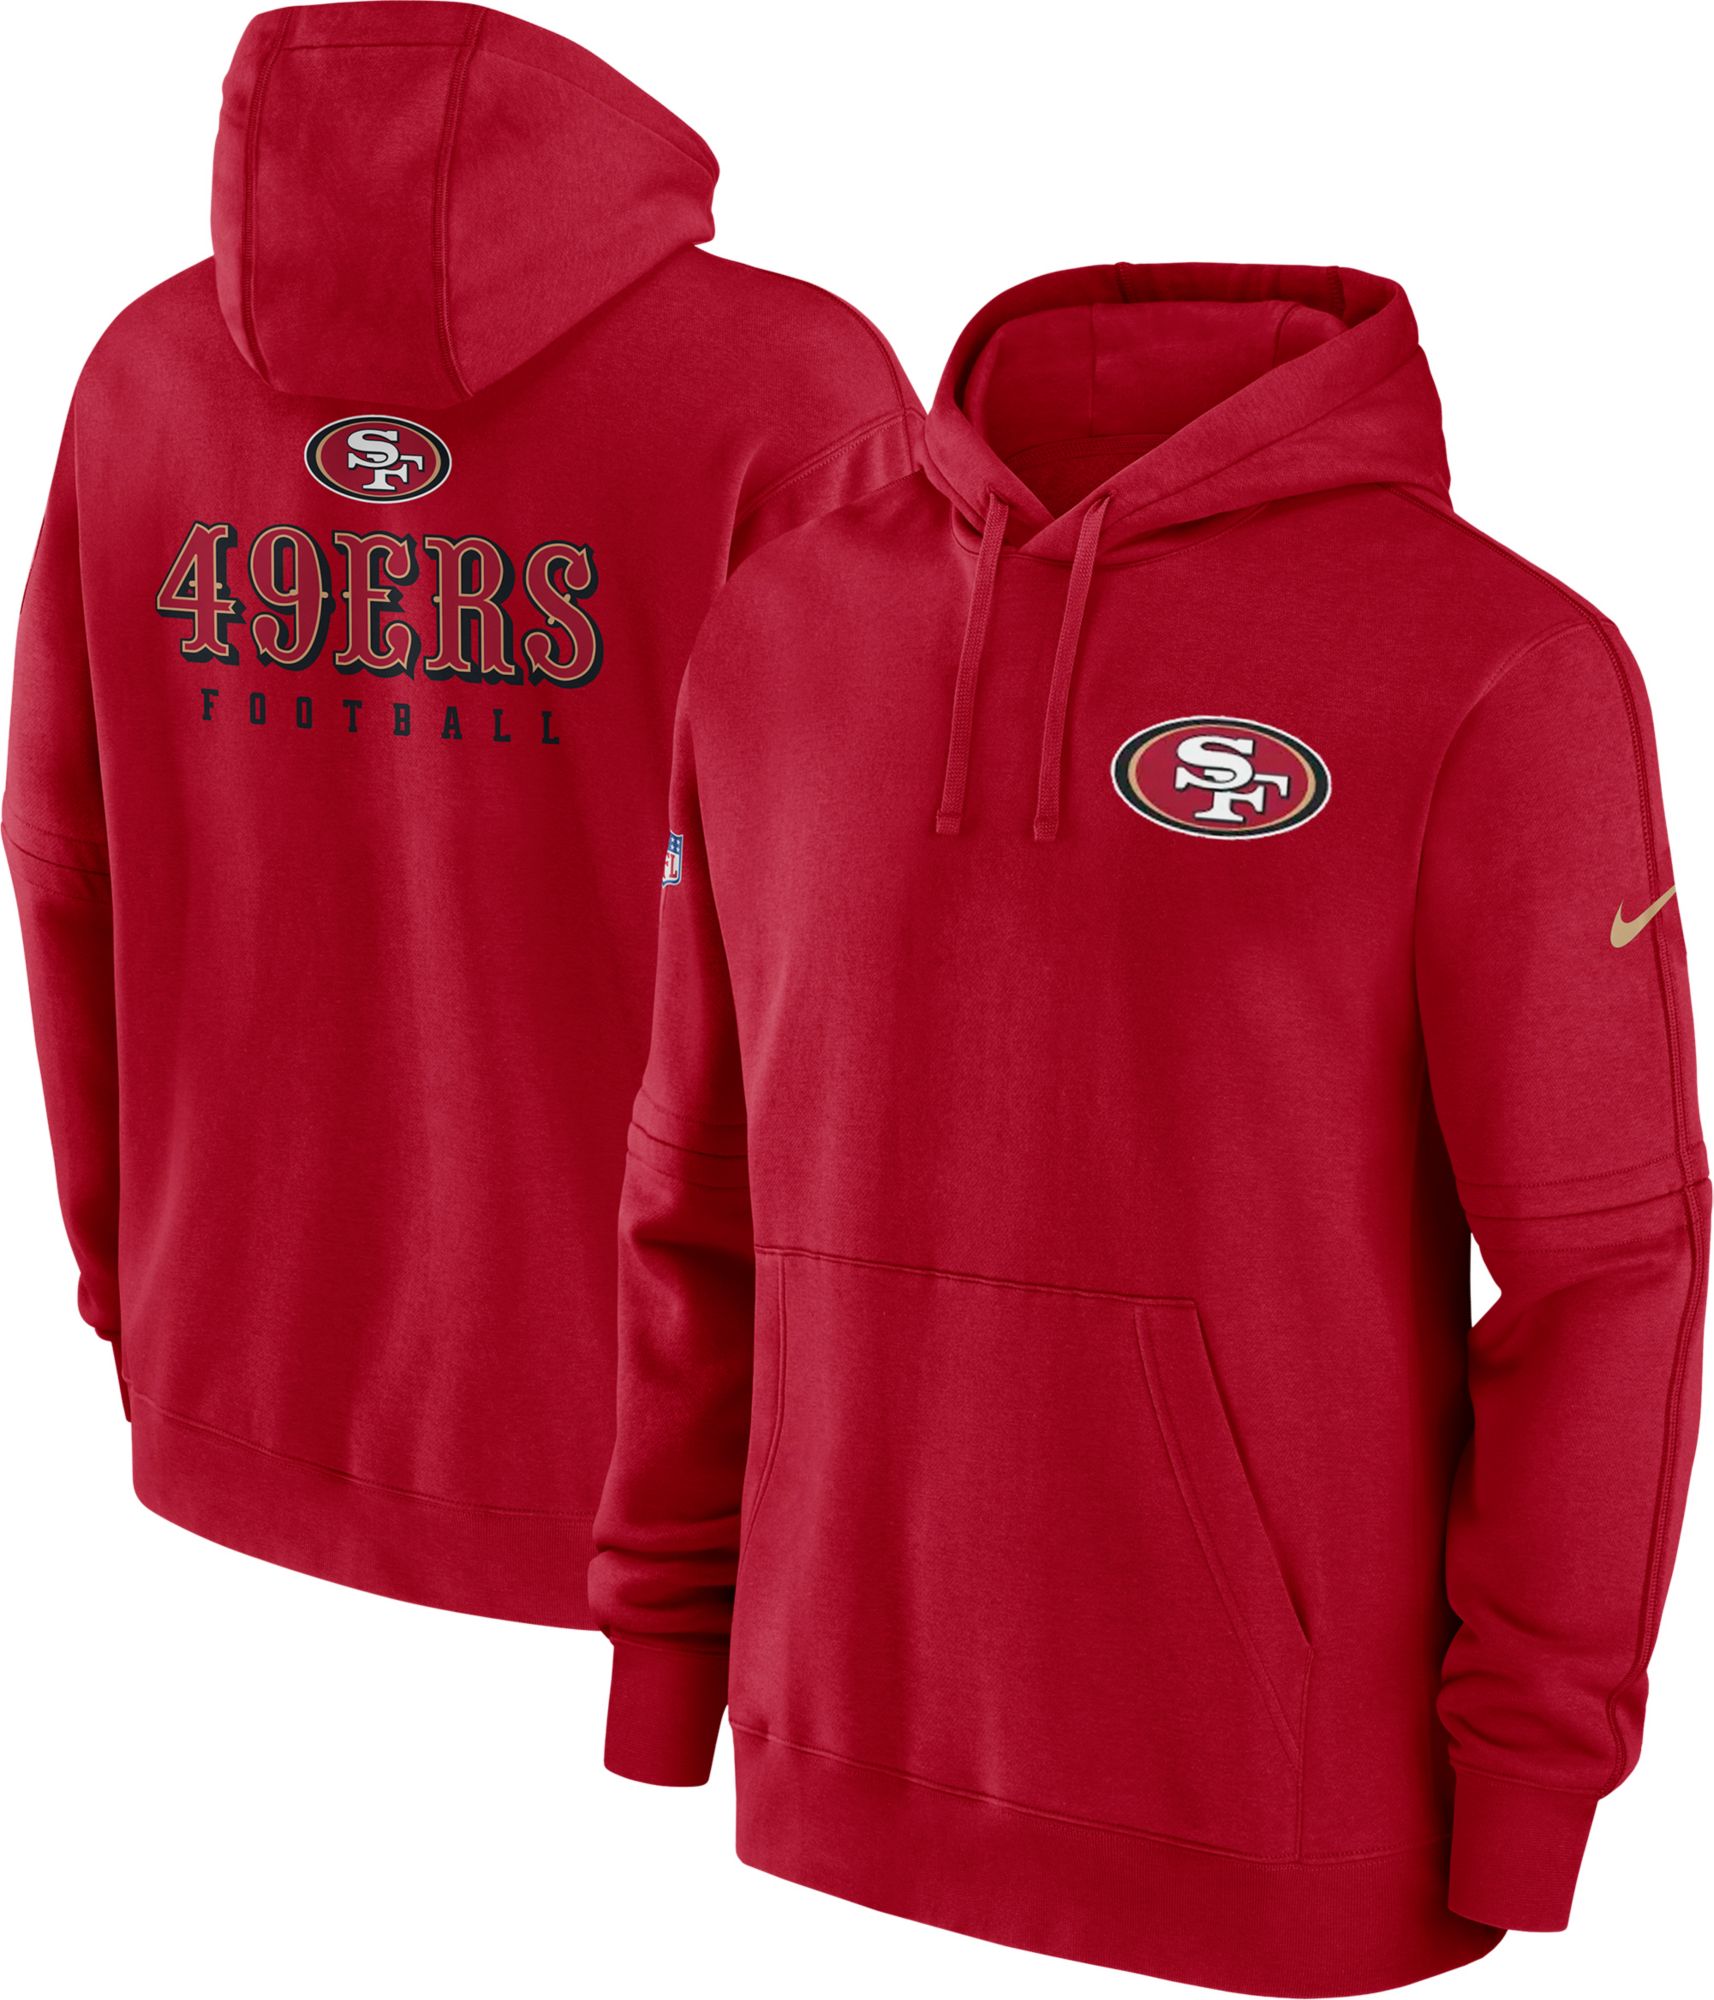 Men's San Francisco 49ers Gifts & Gear, Mens 49ers Apparel, Guys Clothes